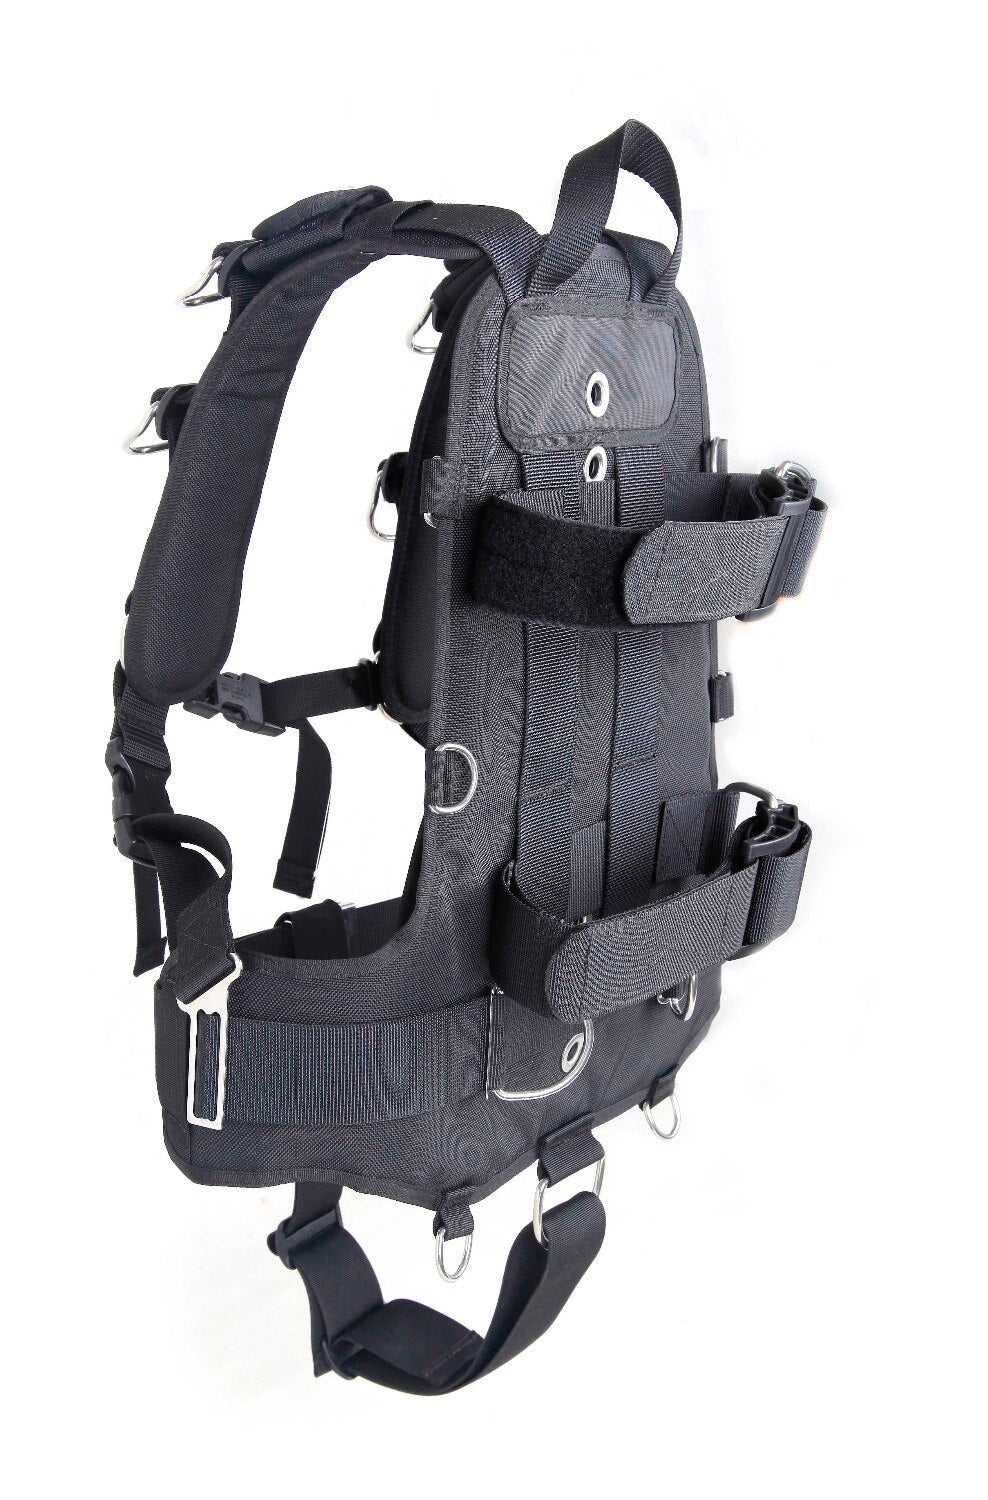 Scuba Soft Harness BCD Backmount Diving Tank Strap Cylinder Trap without Wing